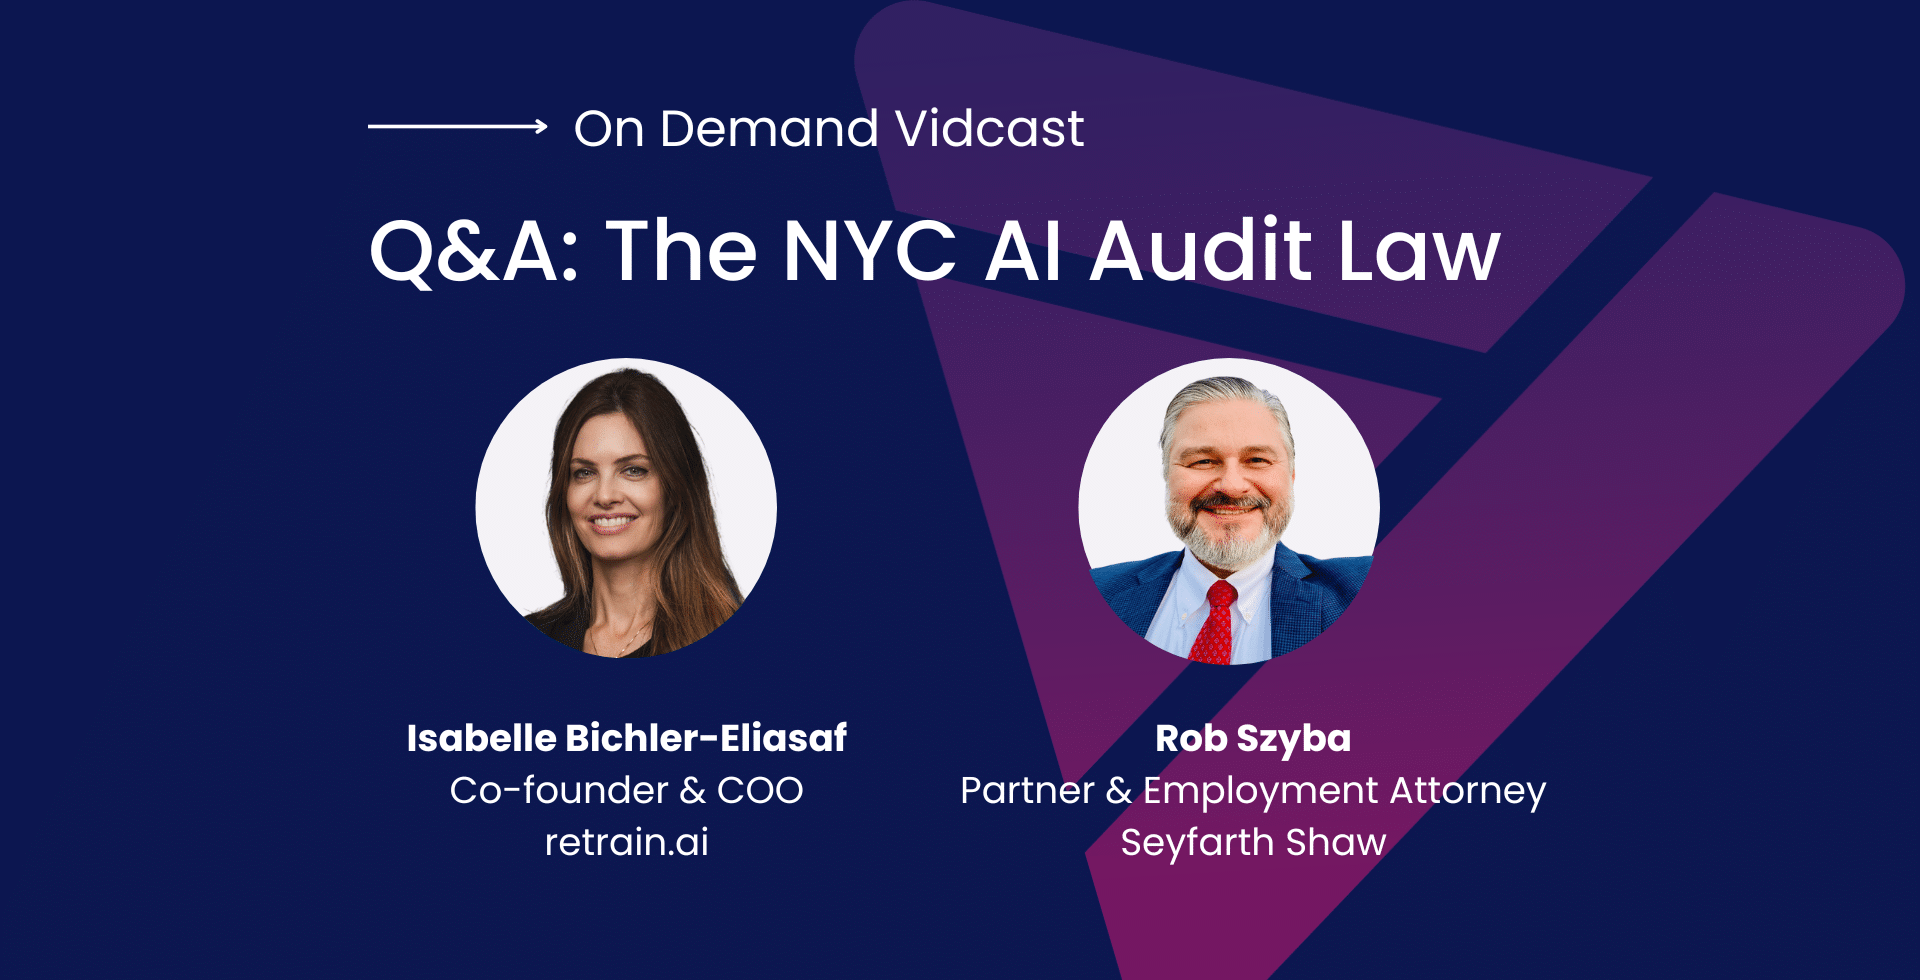 Q&A: The NYC AI Audit Law